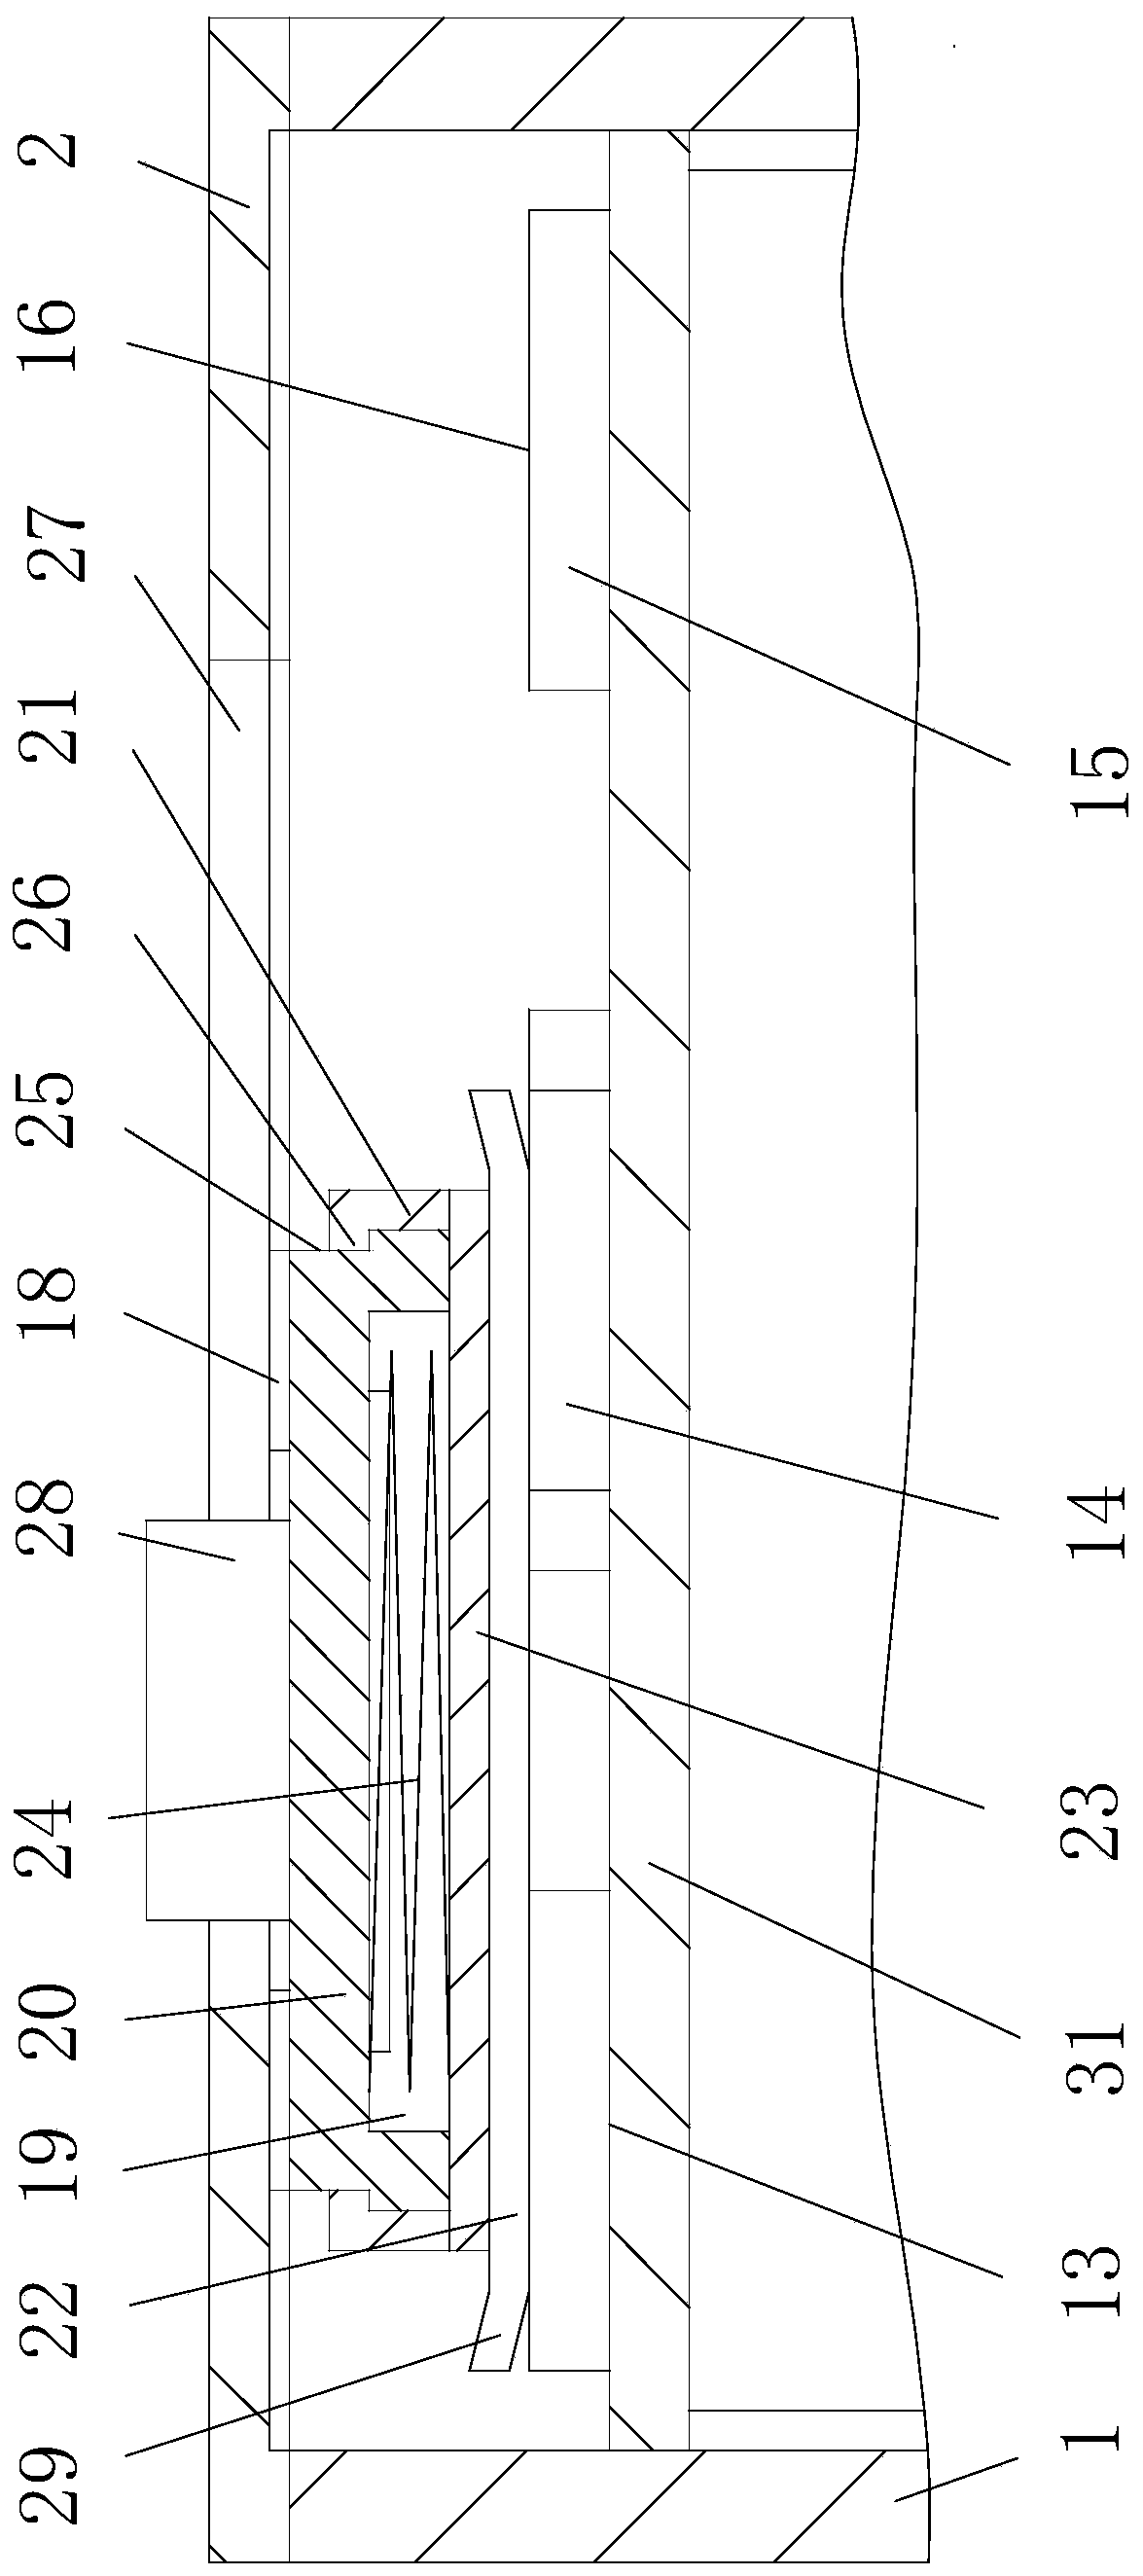 Switching type phase sequence switching combined junction box